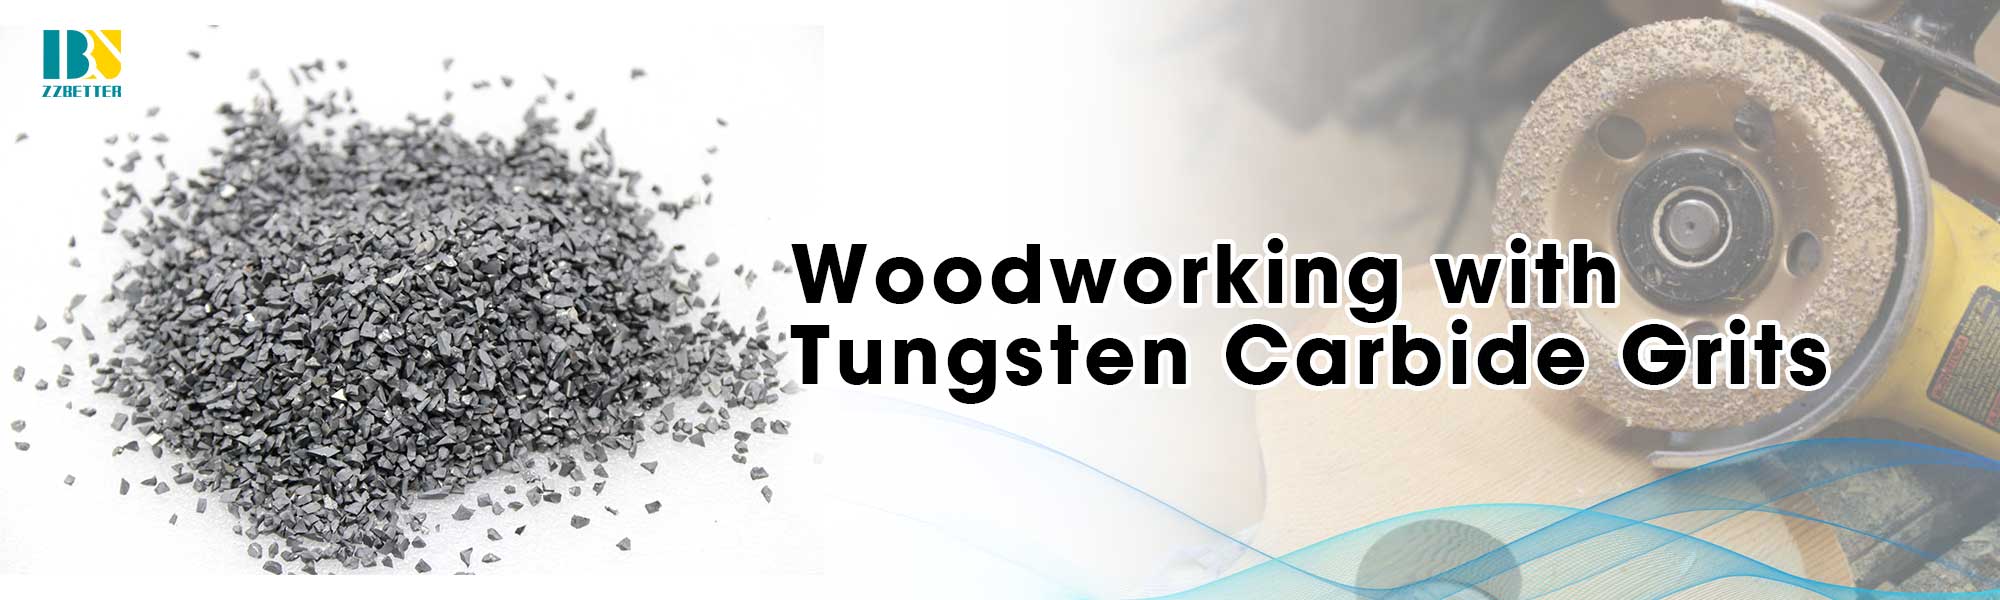 Woodworking with Tungsten Carbide Grits: Enhancing Precision and Durability in Furniture Manufacturing